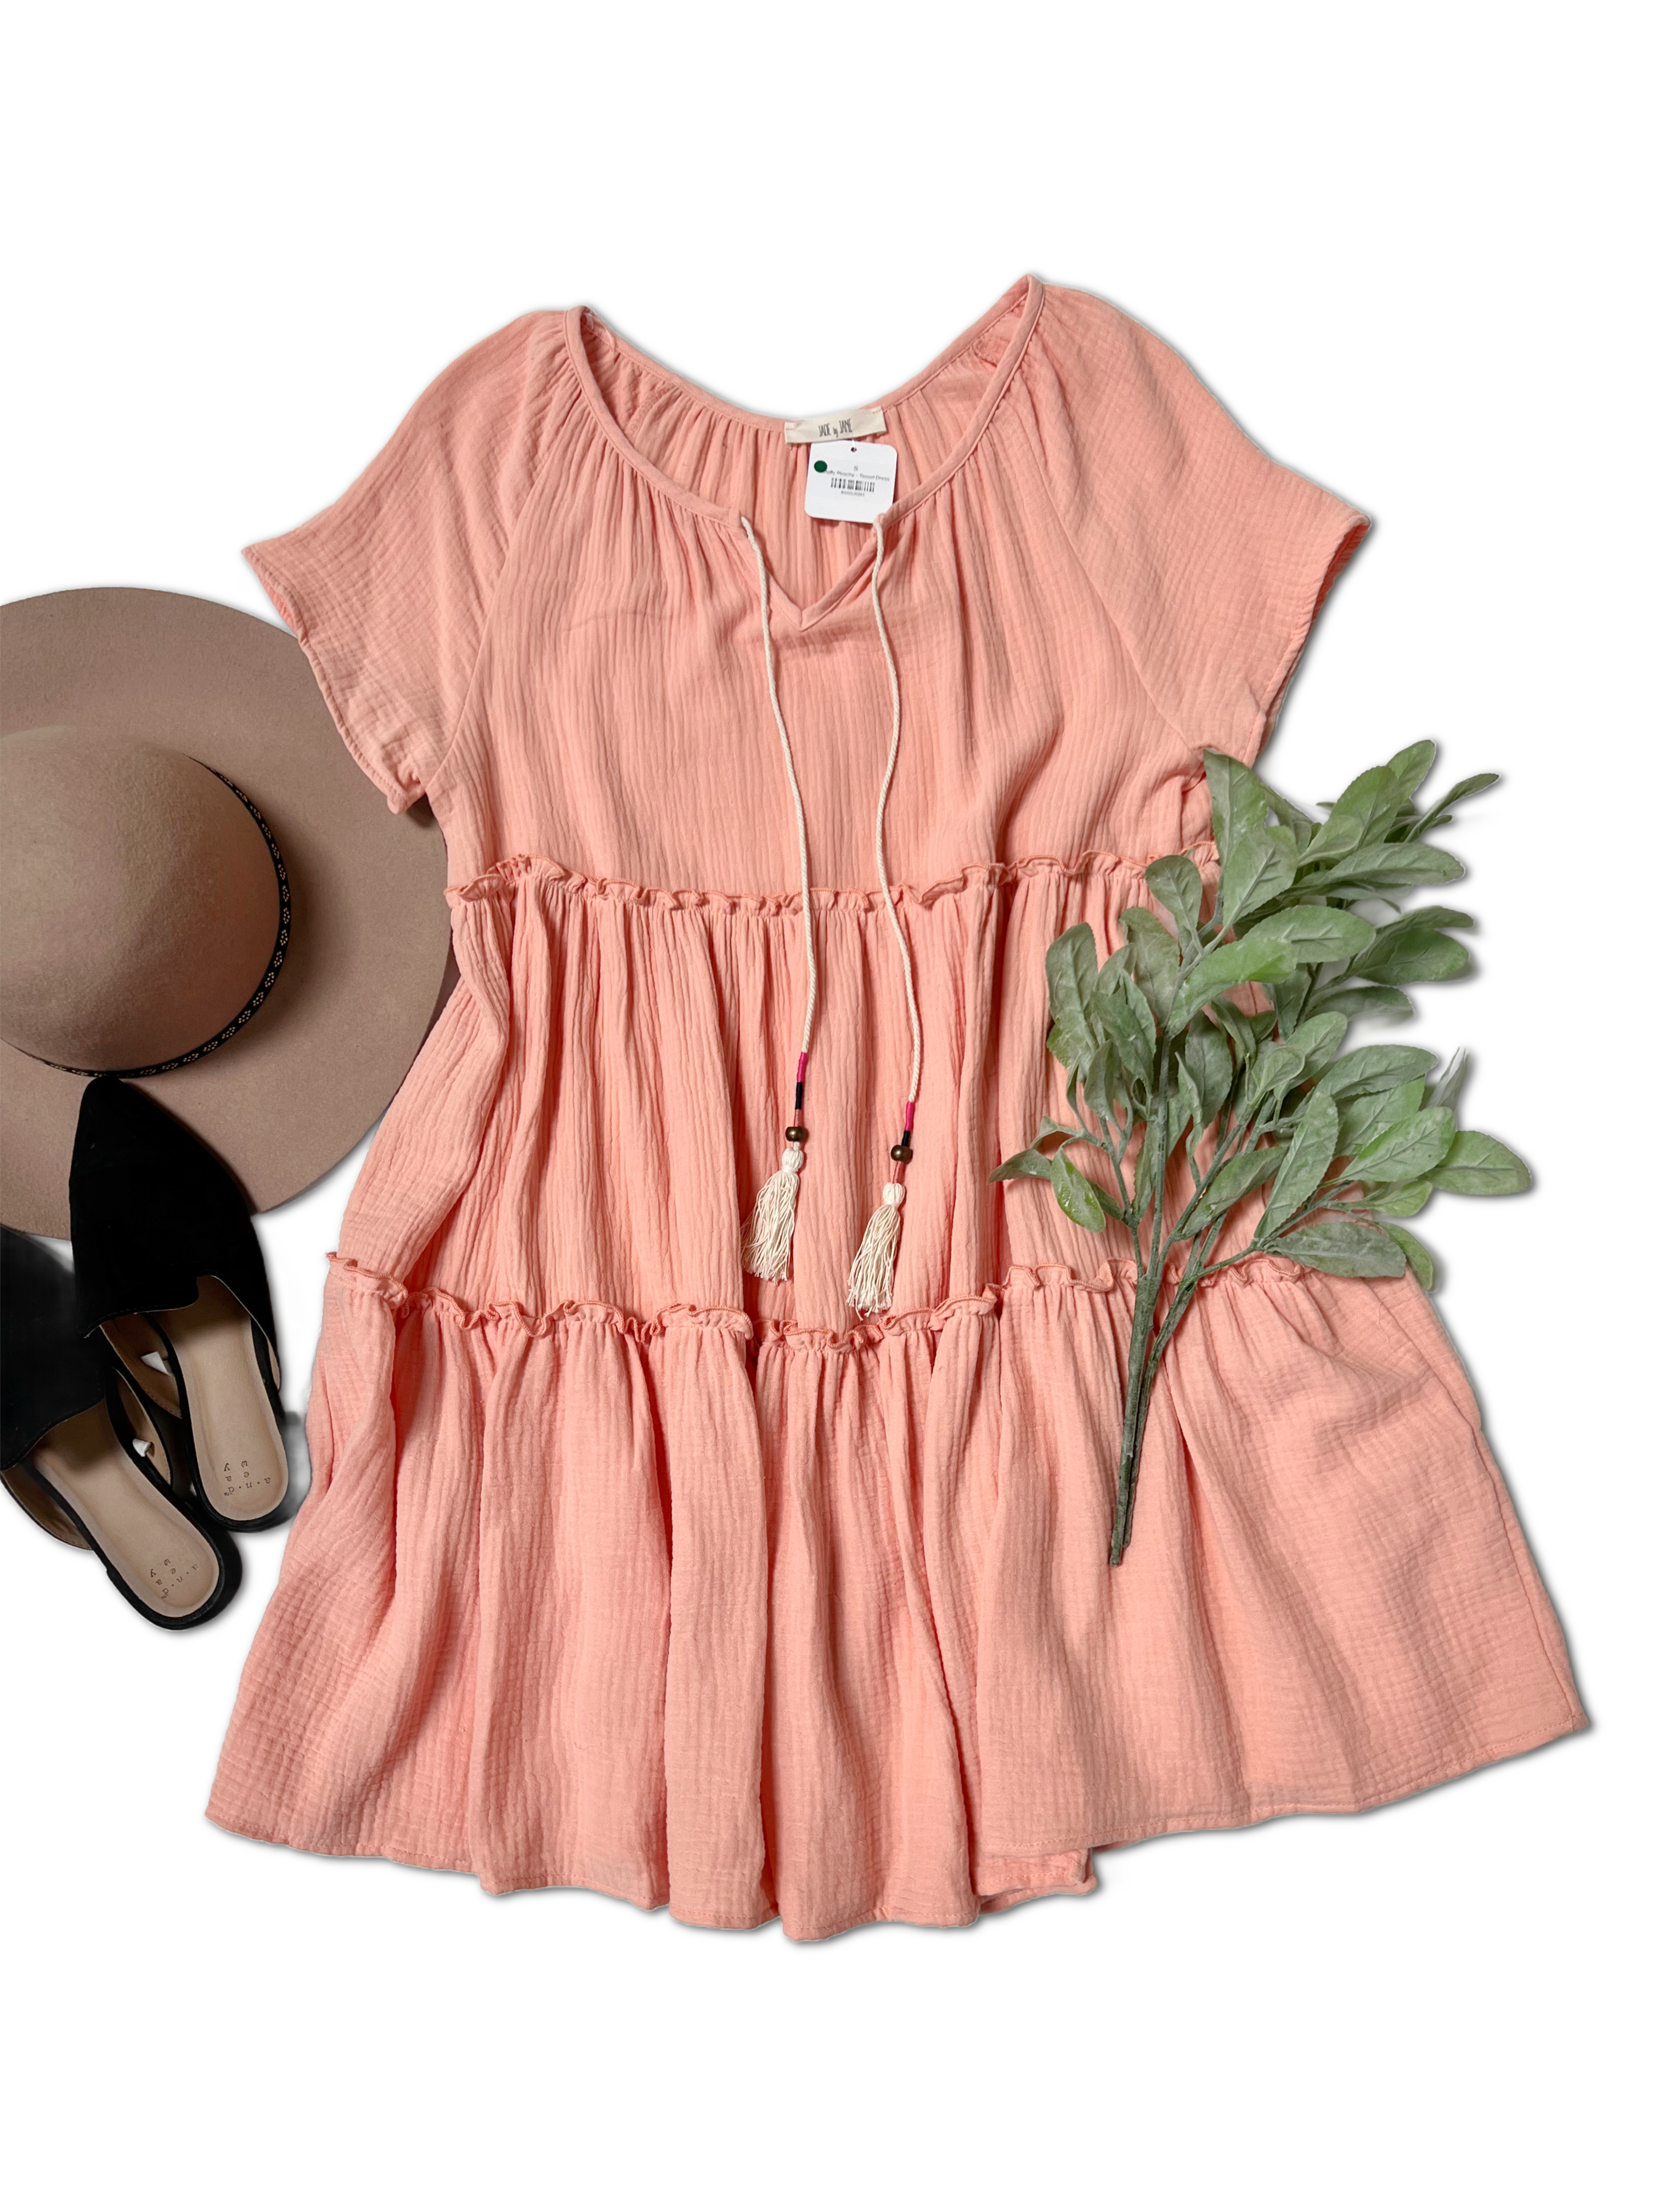 Totally Peachy - Tassel Dress  Boutique Simplified   